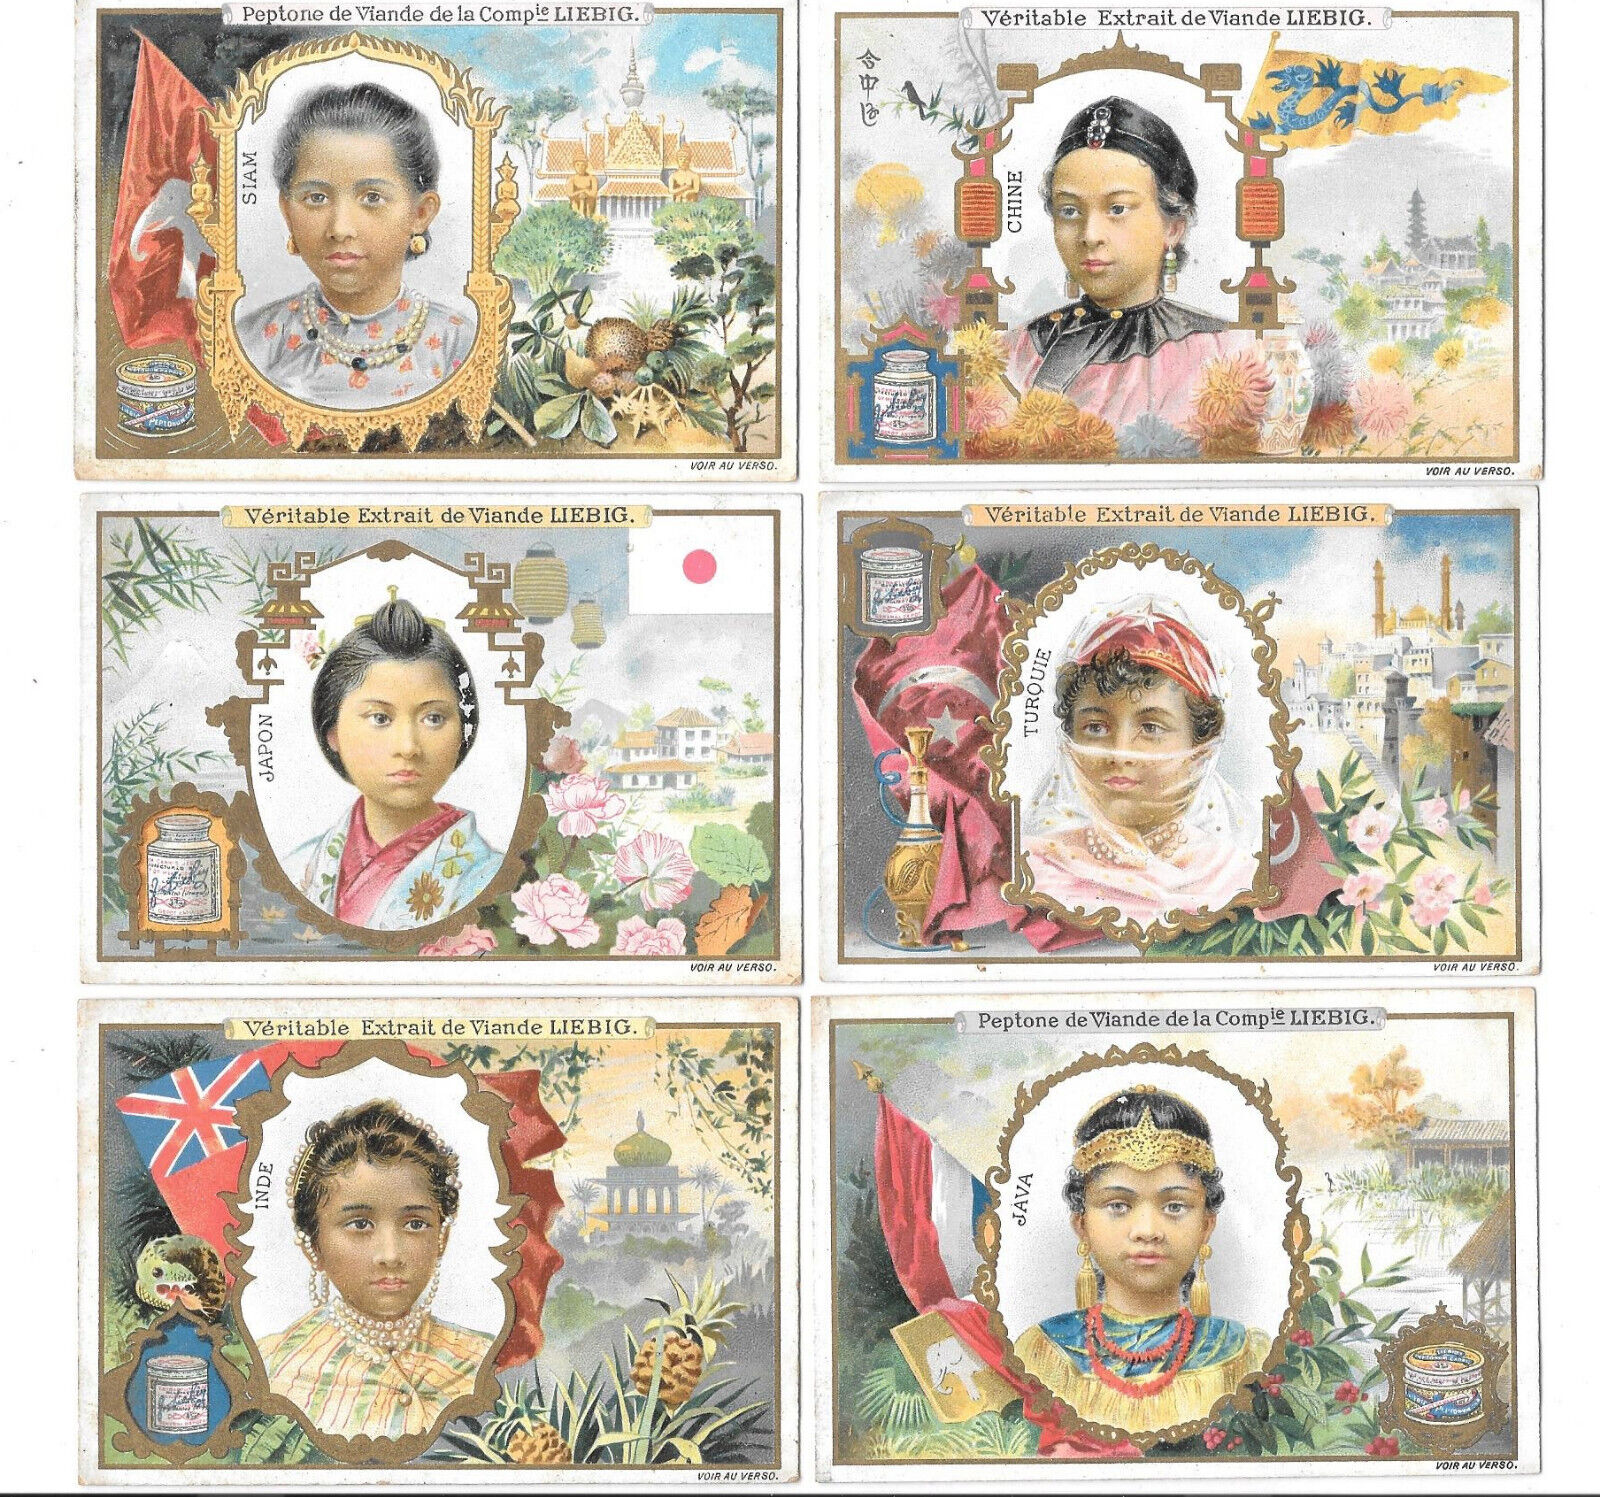 LIEBIG TRADE CARDS, TYPES OF ASIAN WOMEN 1900 Set of 6 Cards (S622 French) Rare.